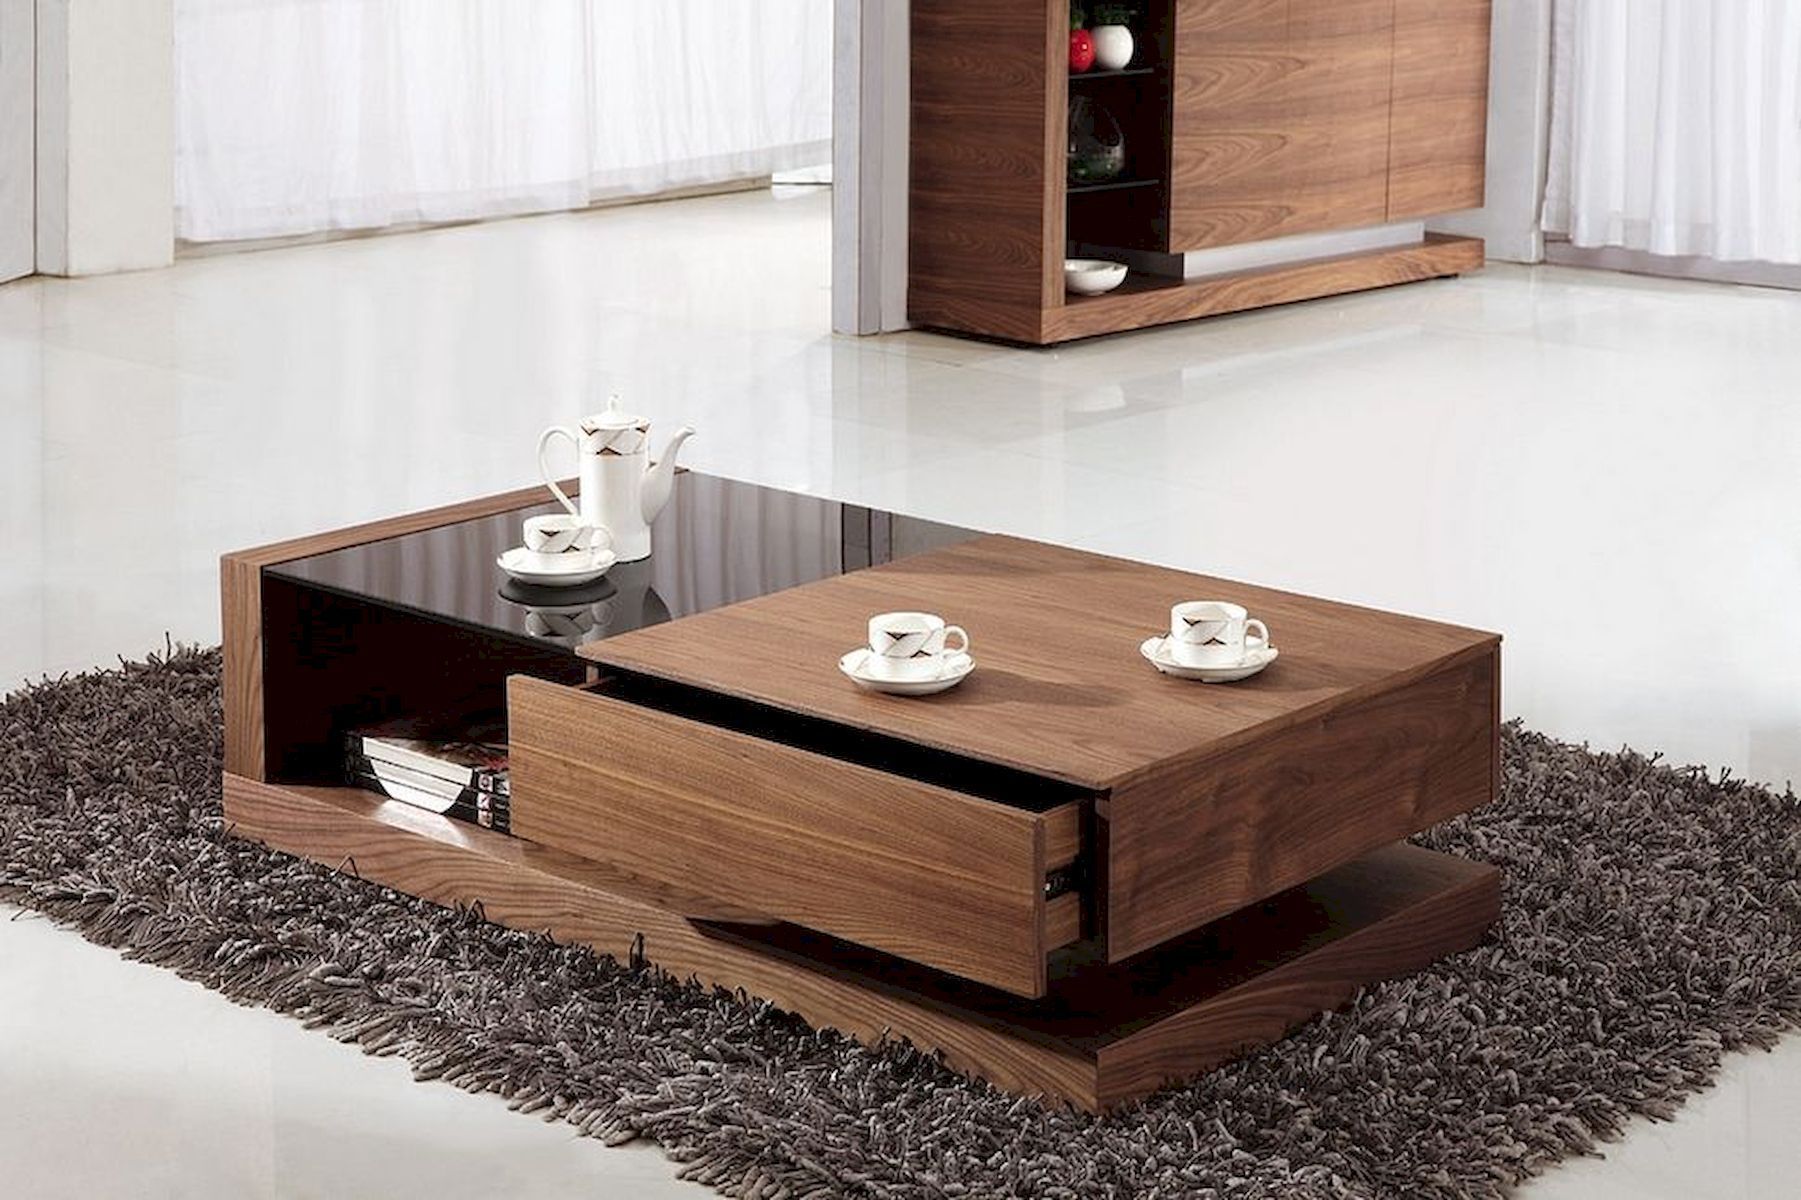 Wooden Coffee Table Designs: Ideas For Your Home – Coffee Table Decor In Modern Wooden X Design Coffee Tables (Gallery 10 of 20)